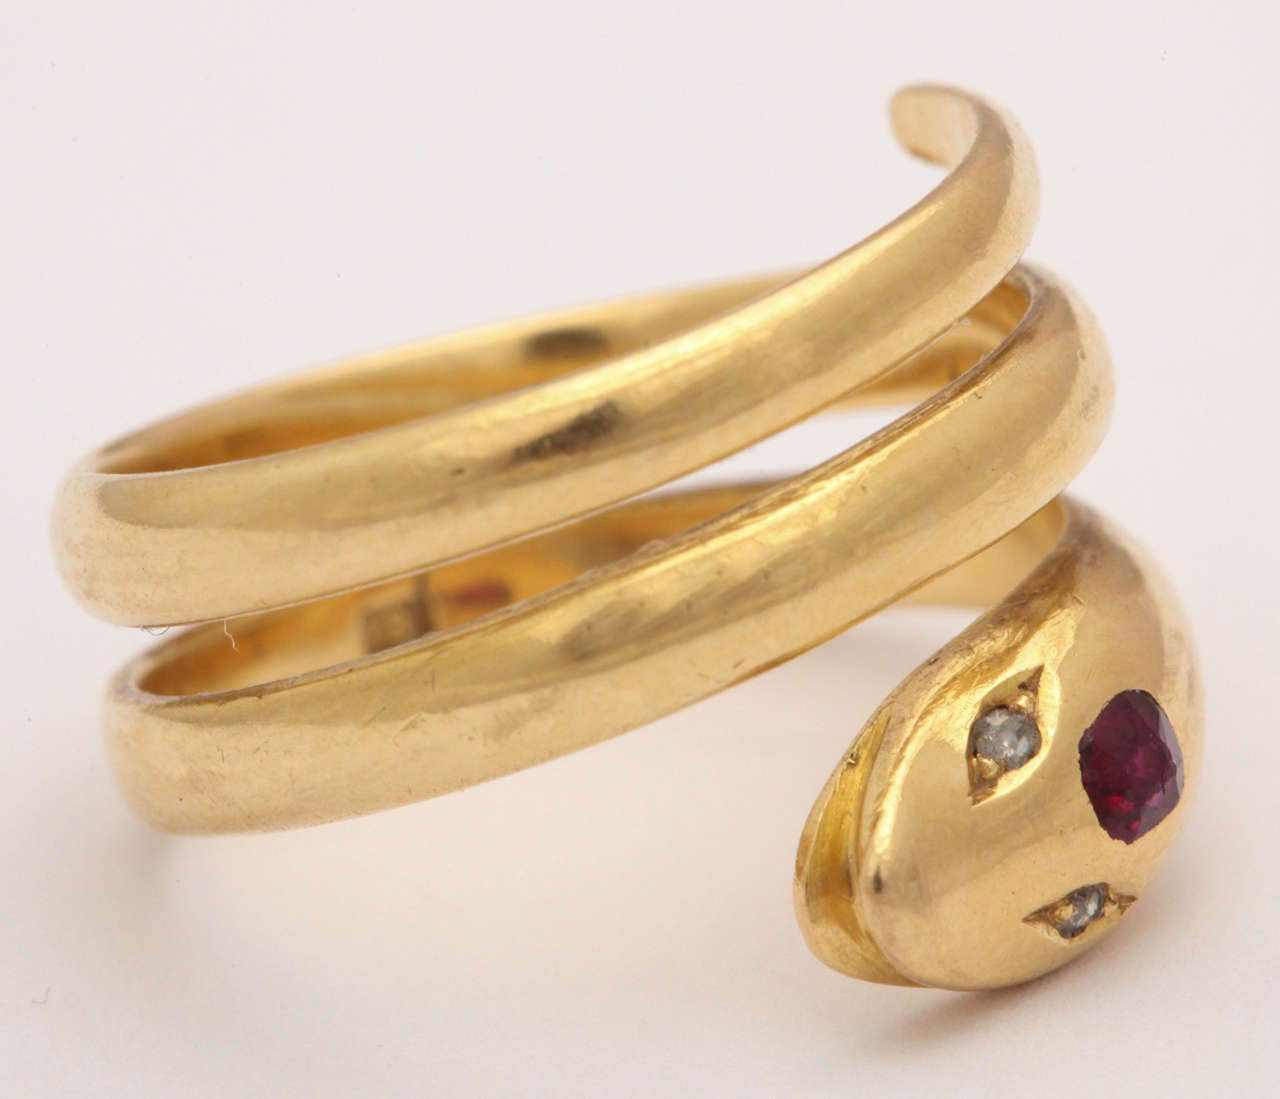  Greetings to a cheerful example of a serpent ring that appears to be smiling enjoying the world in 18 kt gold with diamond eyes and a ruby on the forehead. Why not, she ( my choice of gender) is a symbol of eternal bond and affection.  The serpent